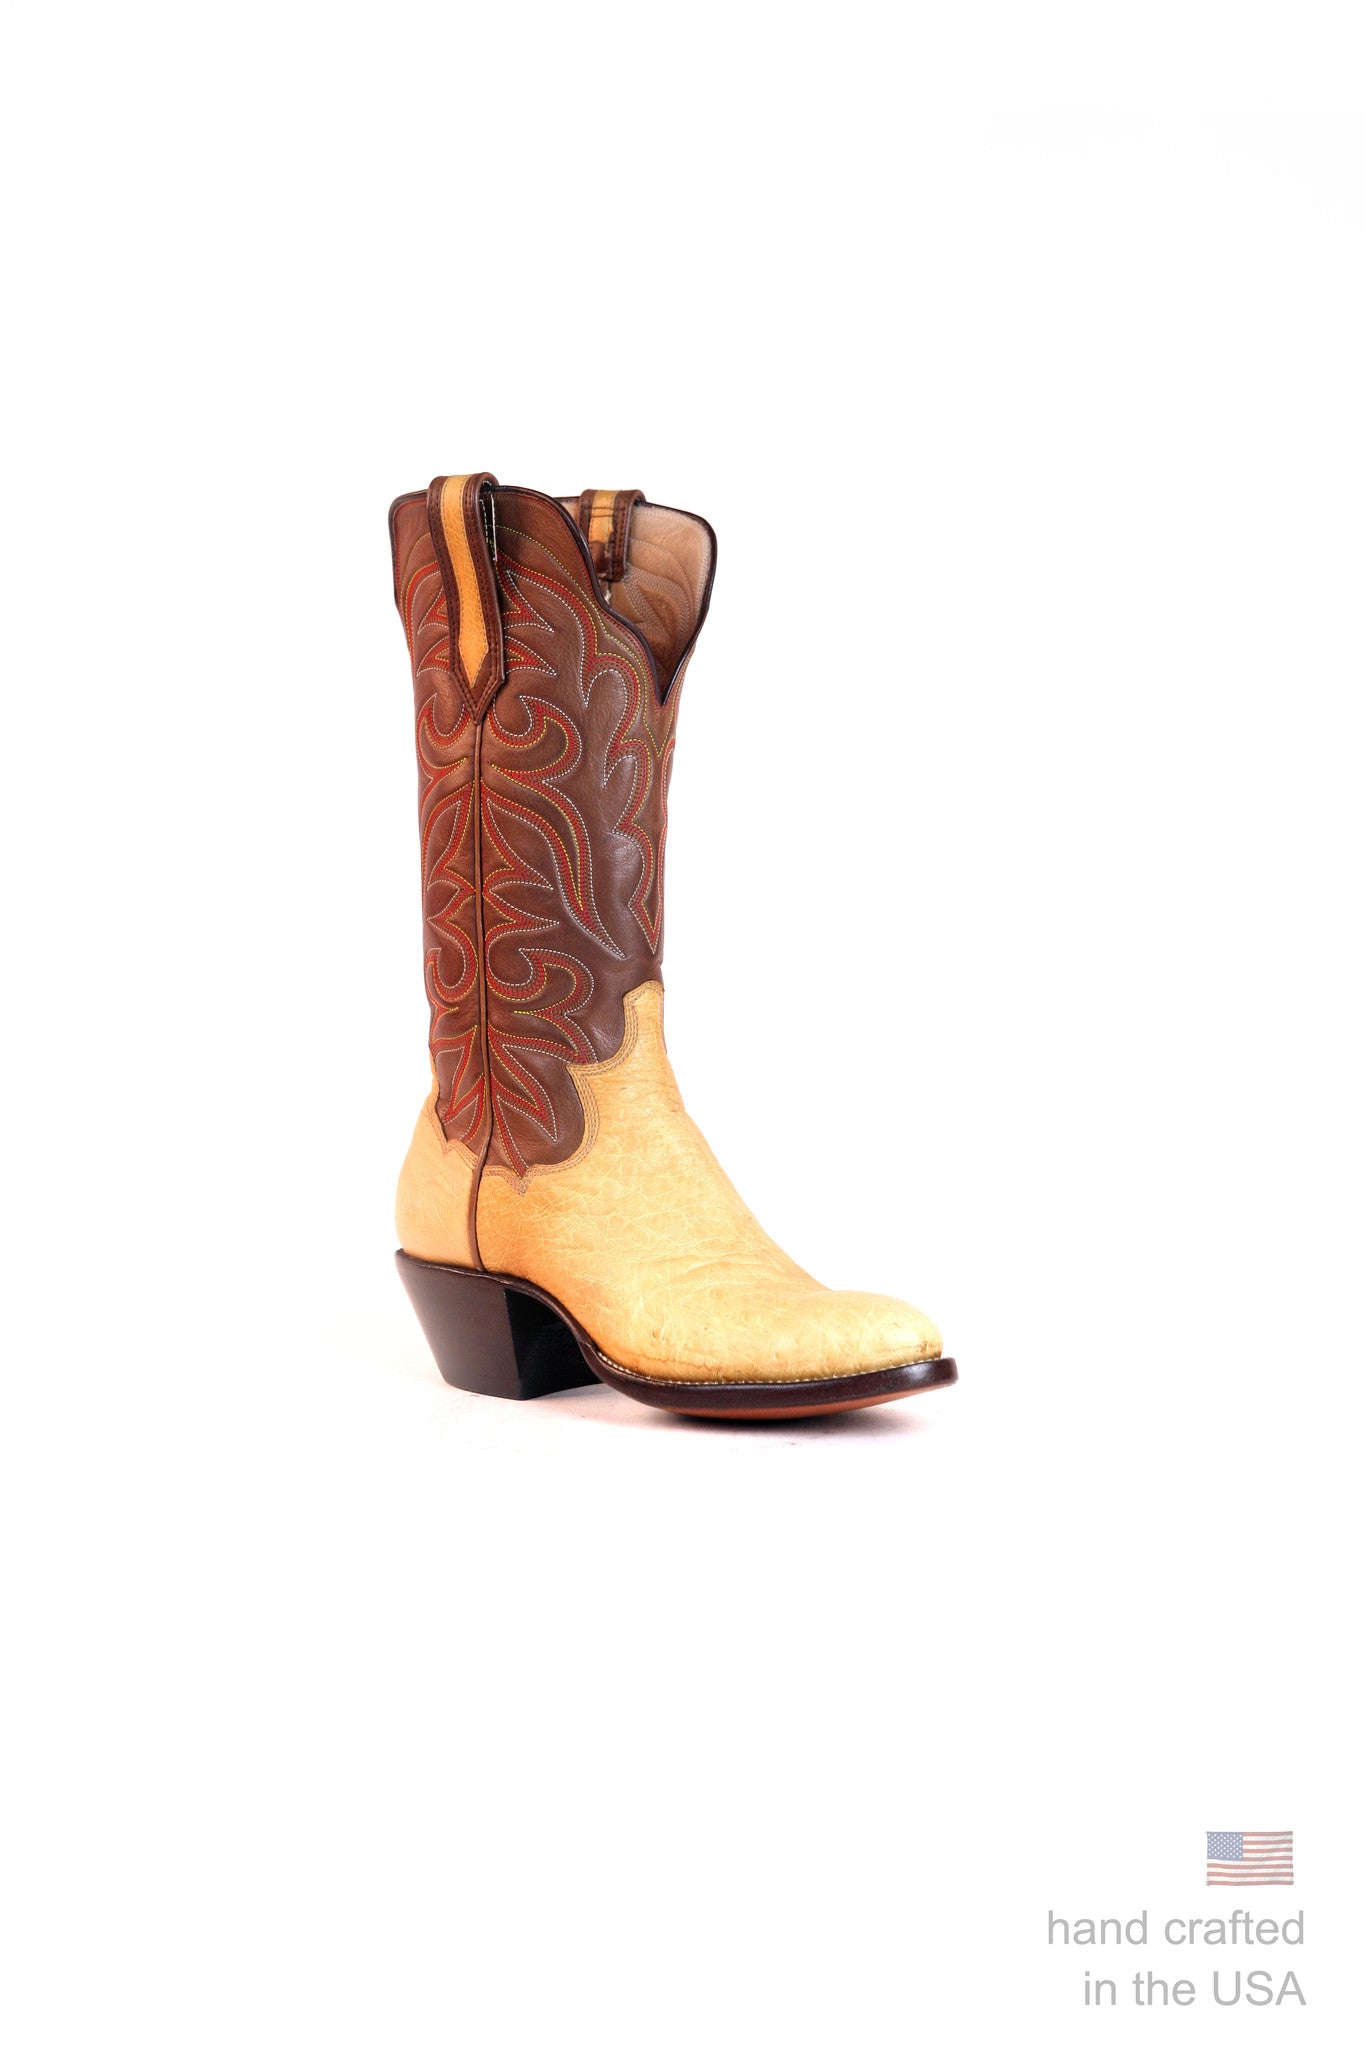 Singles: Boot 0070: Size 5.5 A